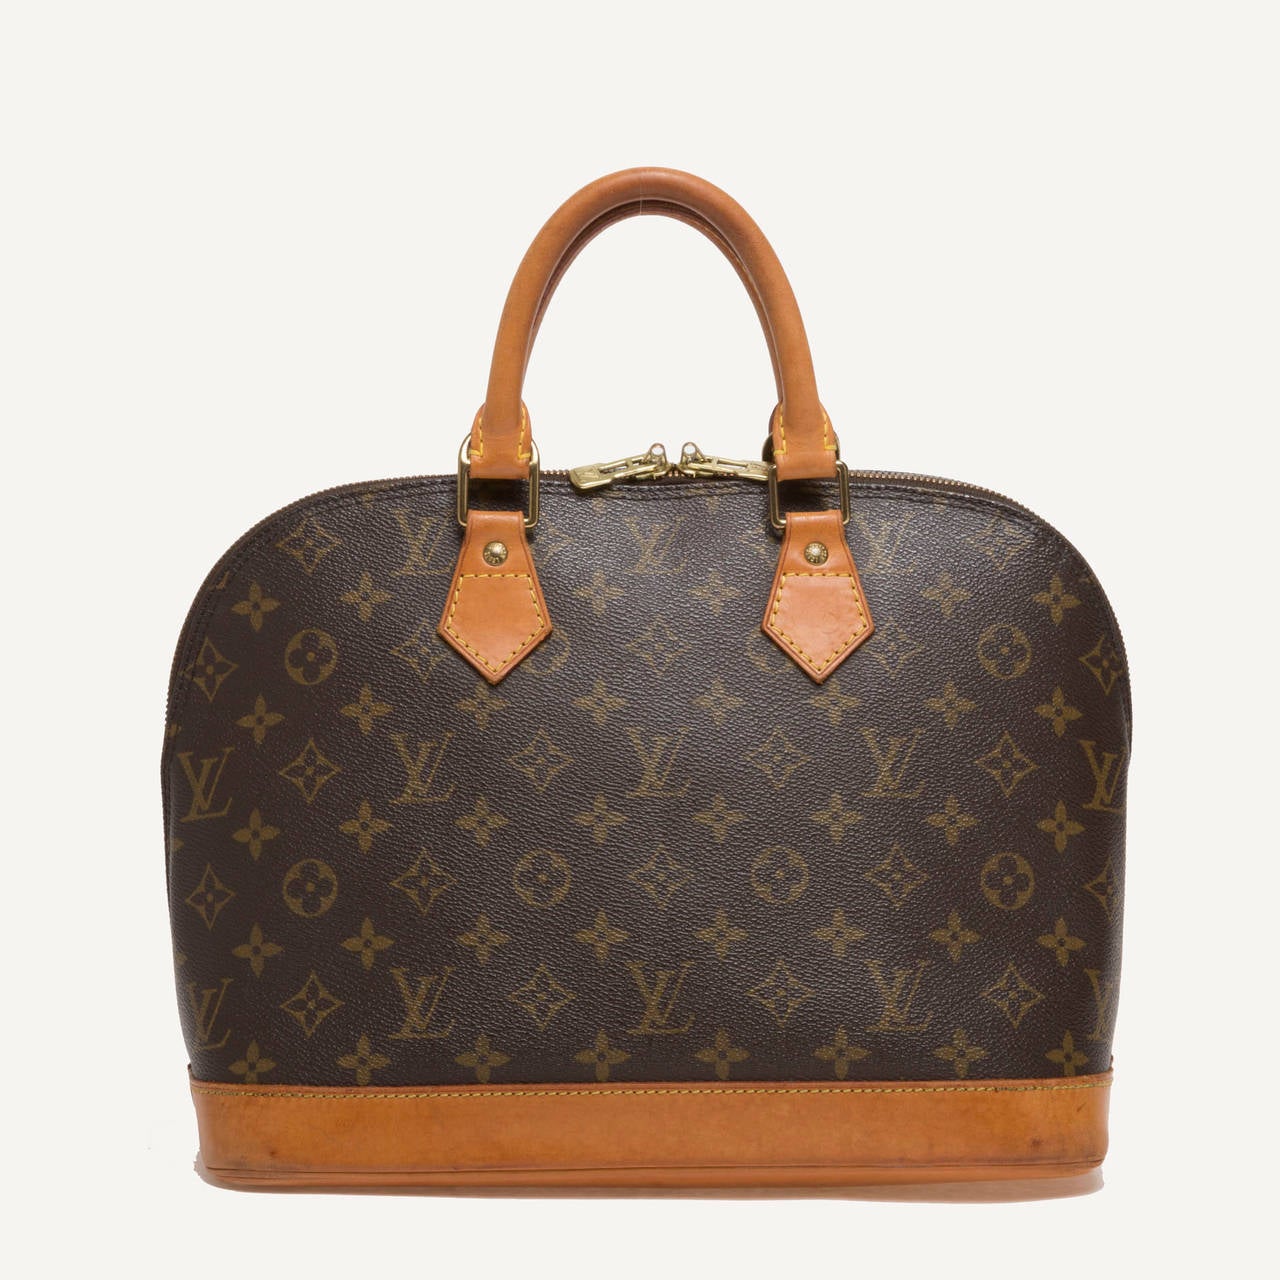 This authentic Louis Vuitton Alma in size PM features the iconic brand's signature monogram canvas print. Its dome-like shape and structured leather base creates a modern twist to the bag. The zip around opening and roomy interior highlights it as